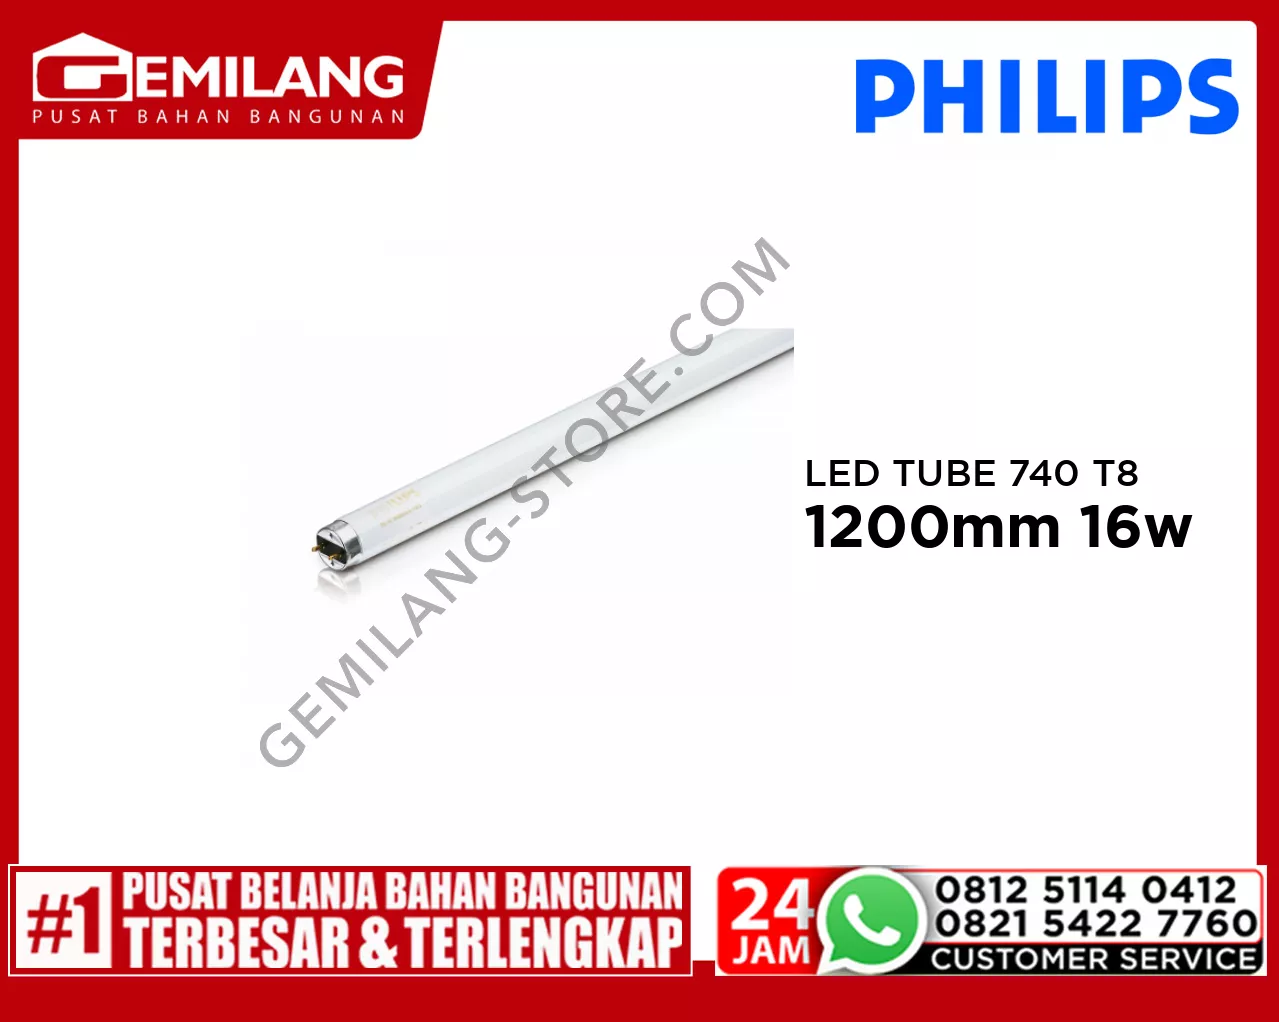 PHILIPS LED TUBE 740 KNG T8 1200mm 16w